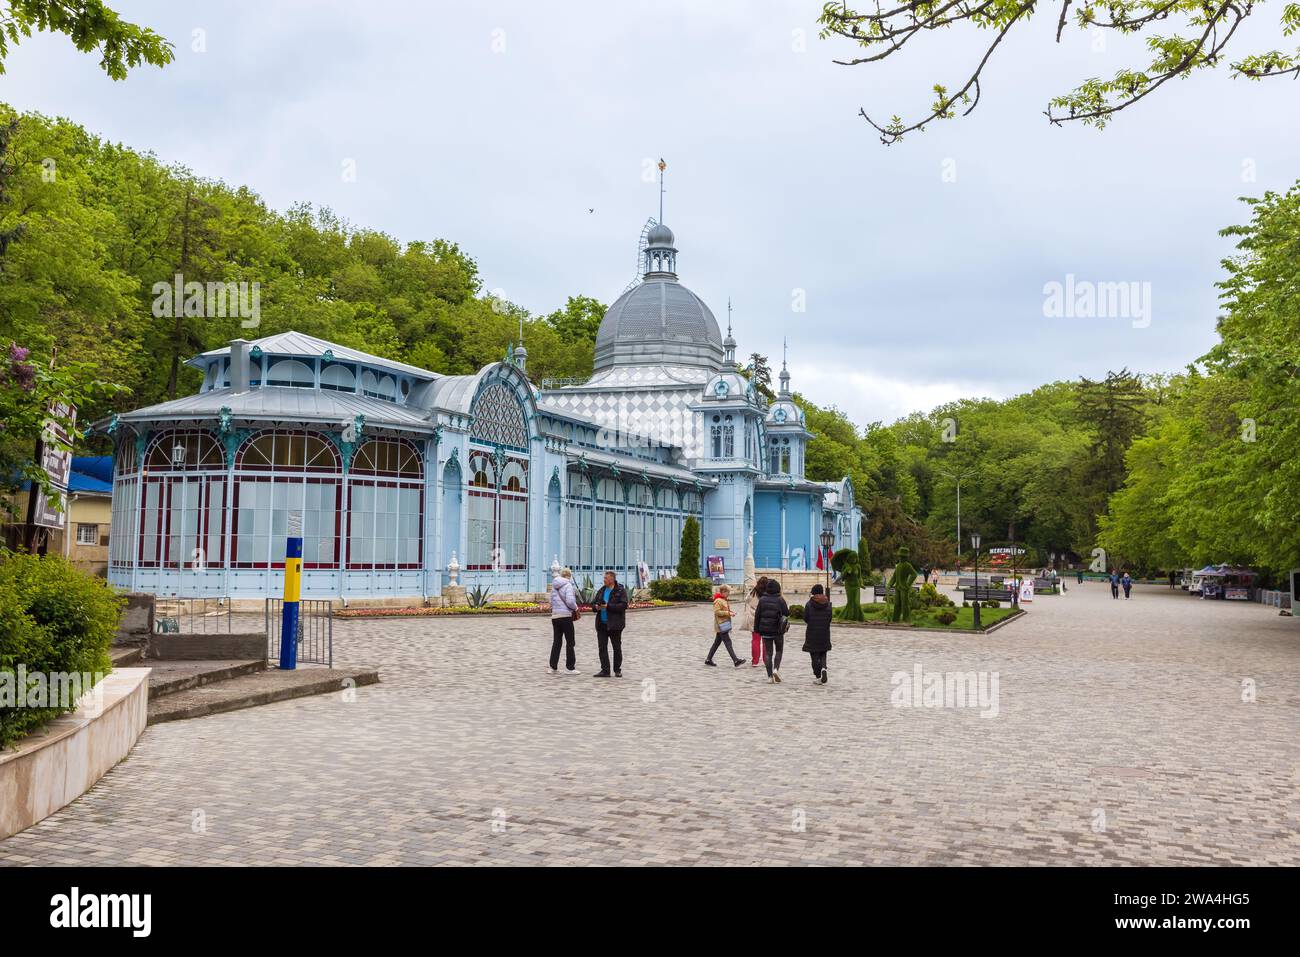 Zheleznovodsk, Russia - May 11, 2023: Tourists walk in front of Pushkin Gallery on a summer day Stock Photo